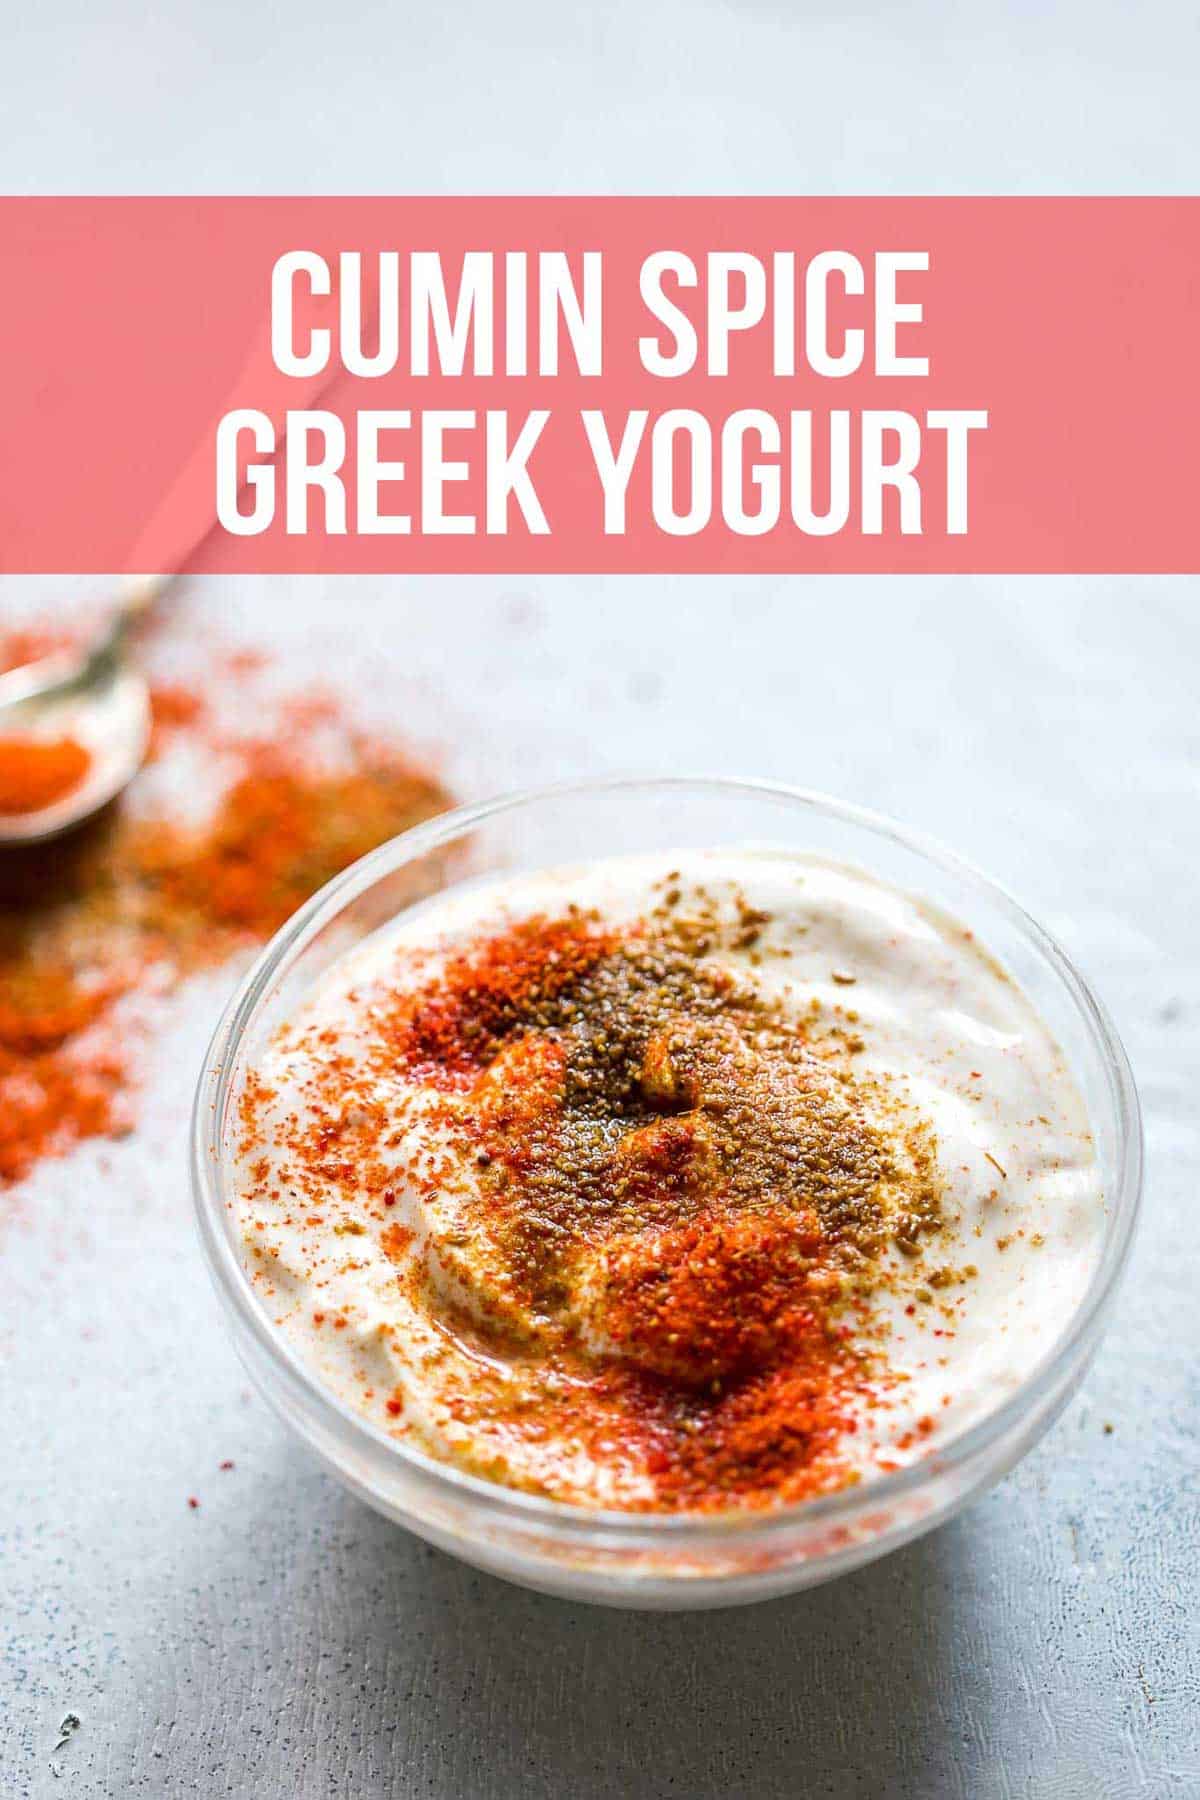 Cumin spice greek yogurt served in a bowl with cumin and chilli powder sprinkled on top